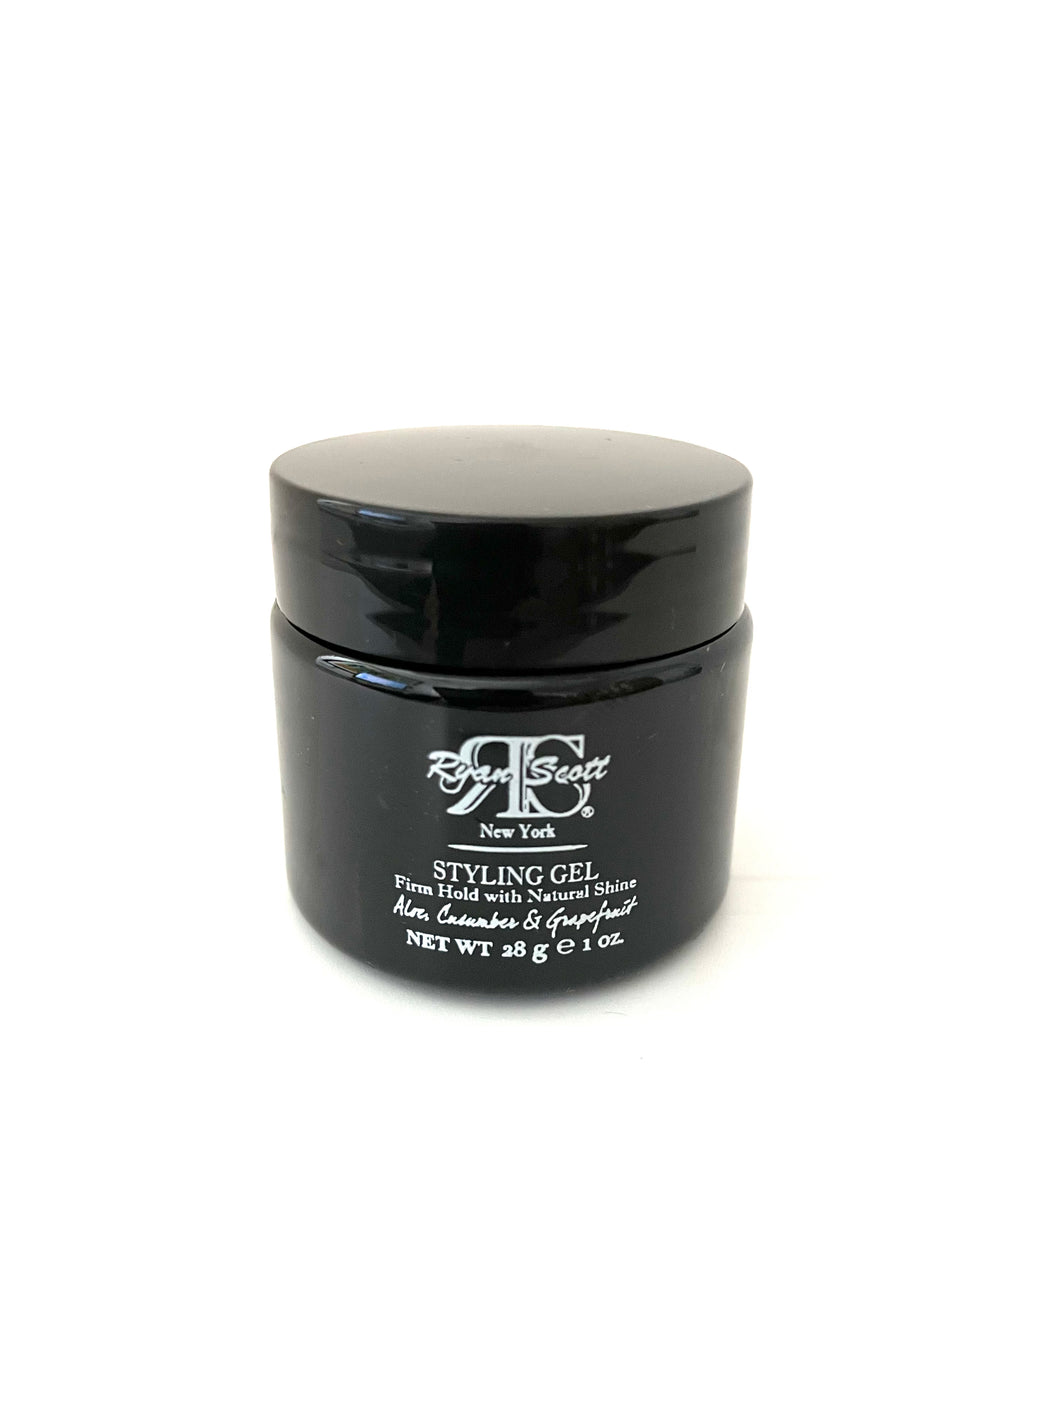 Styling Gel - Firm Hold with Natural Shine - Travel Size  1.0oz